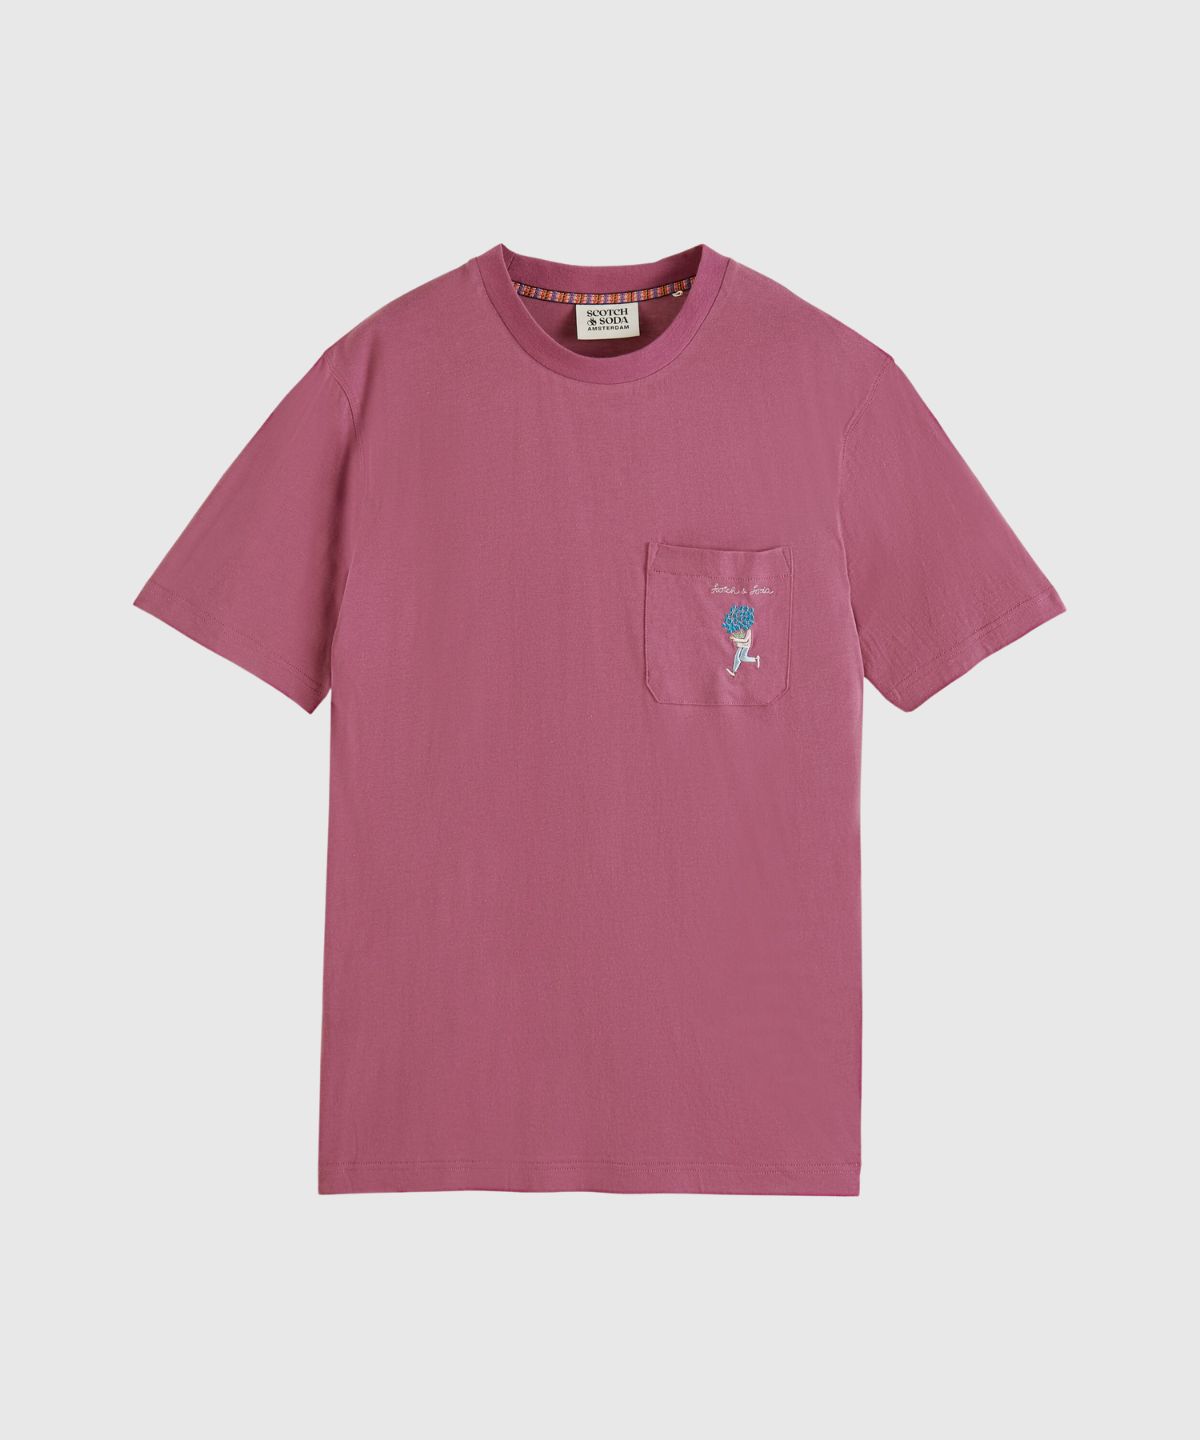 Chest pocket embroidered T-shirt in Cotton/Lyocell